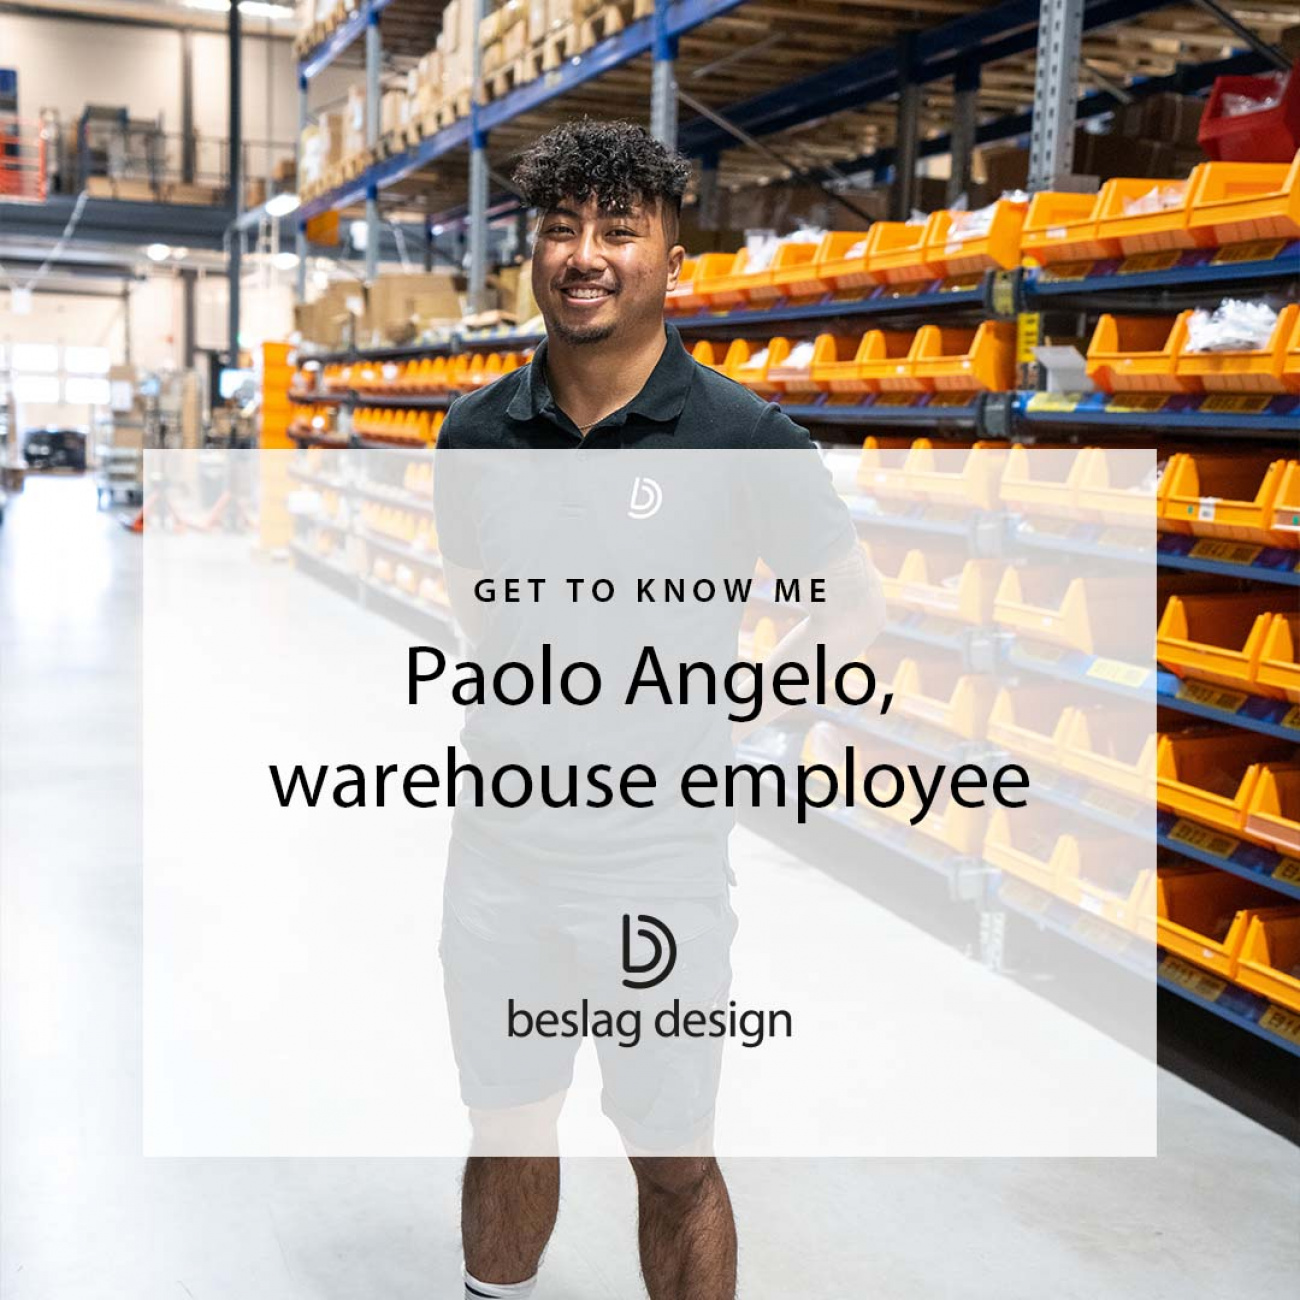 Get to know me: Paolo Angelo, warehouse employee